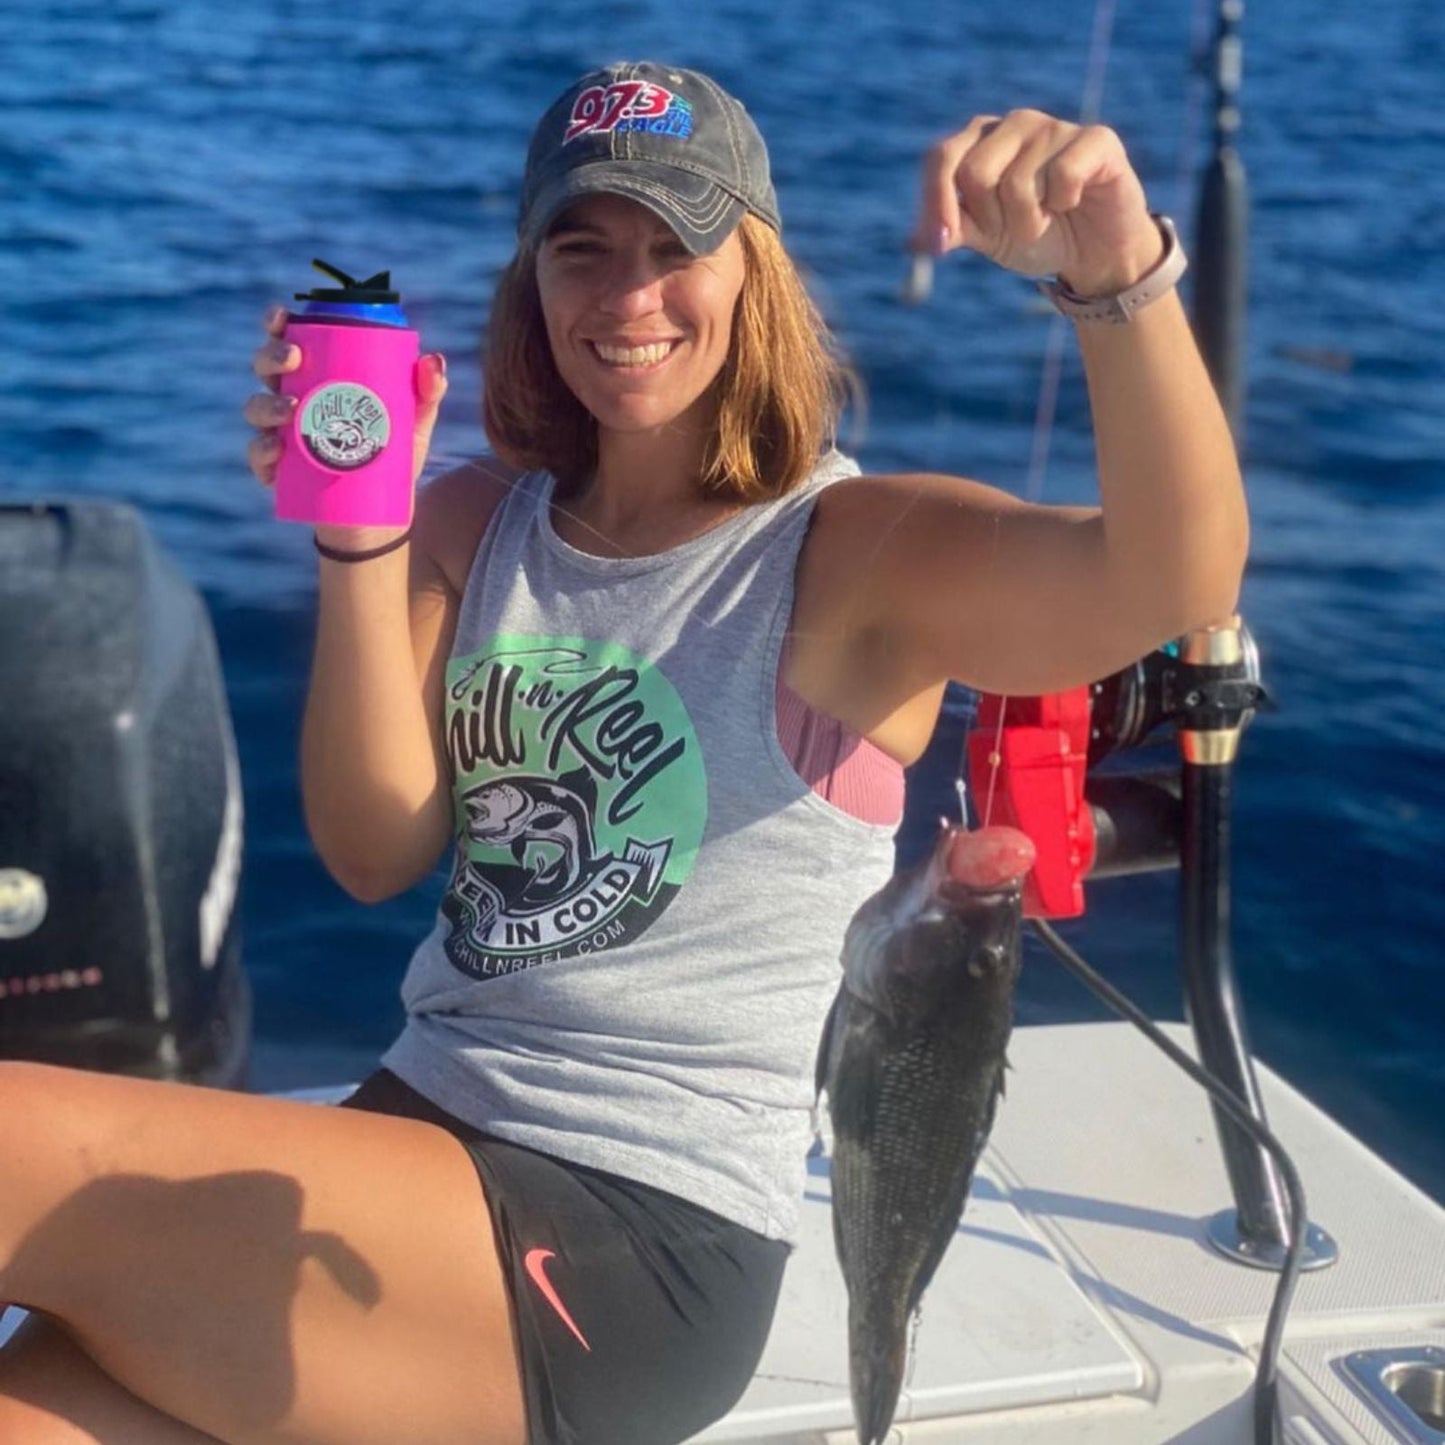 A person is sitting on a boat holding a fishing line with a fish attached in one hand and a fun fishing gift—a Pink Original Chill-N-Reel by Chill-N-Reel—in the other. She is wearing a sleeveless shirt, shorts, and a cap, smiling while enjoying a sunny day on the water.